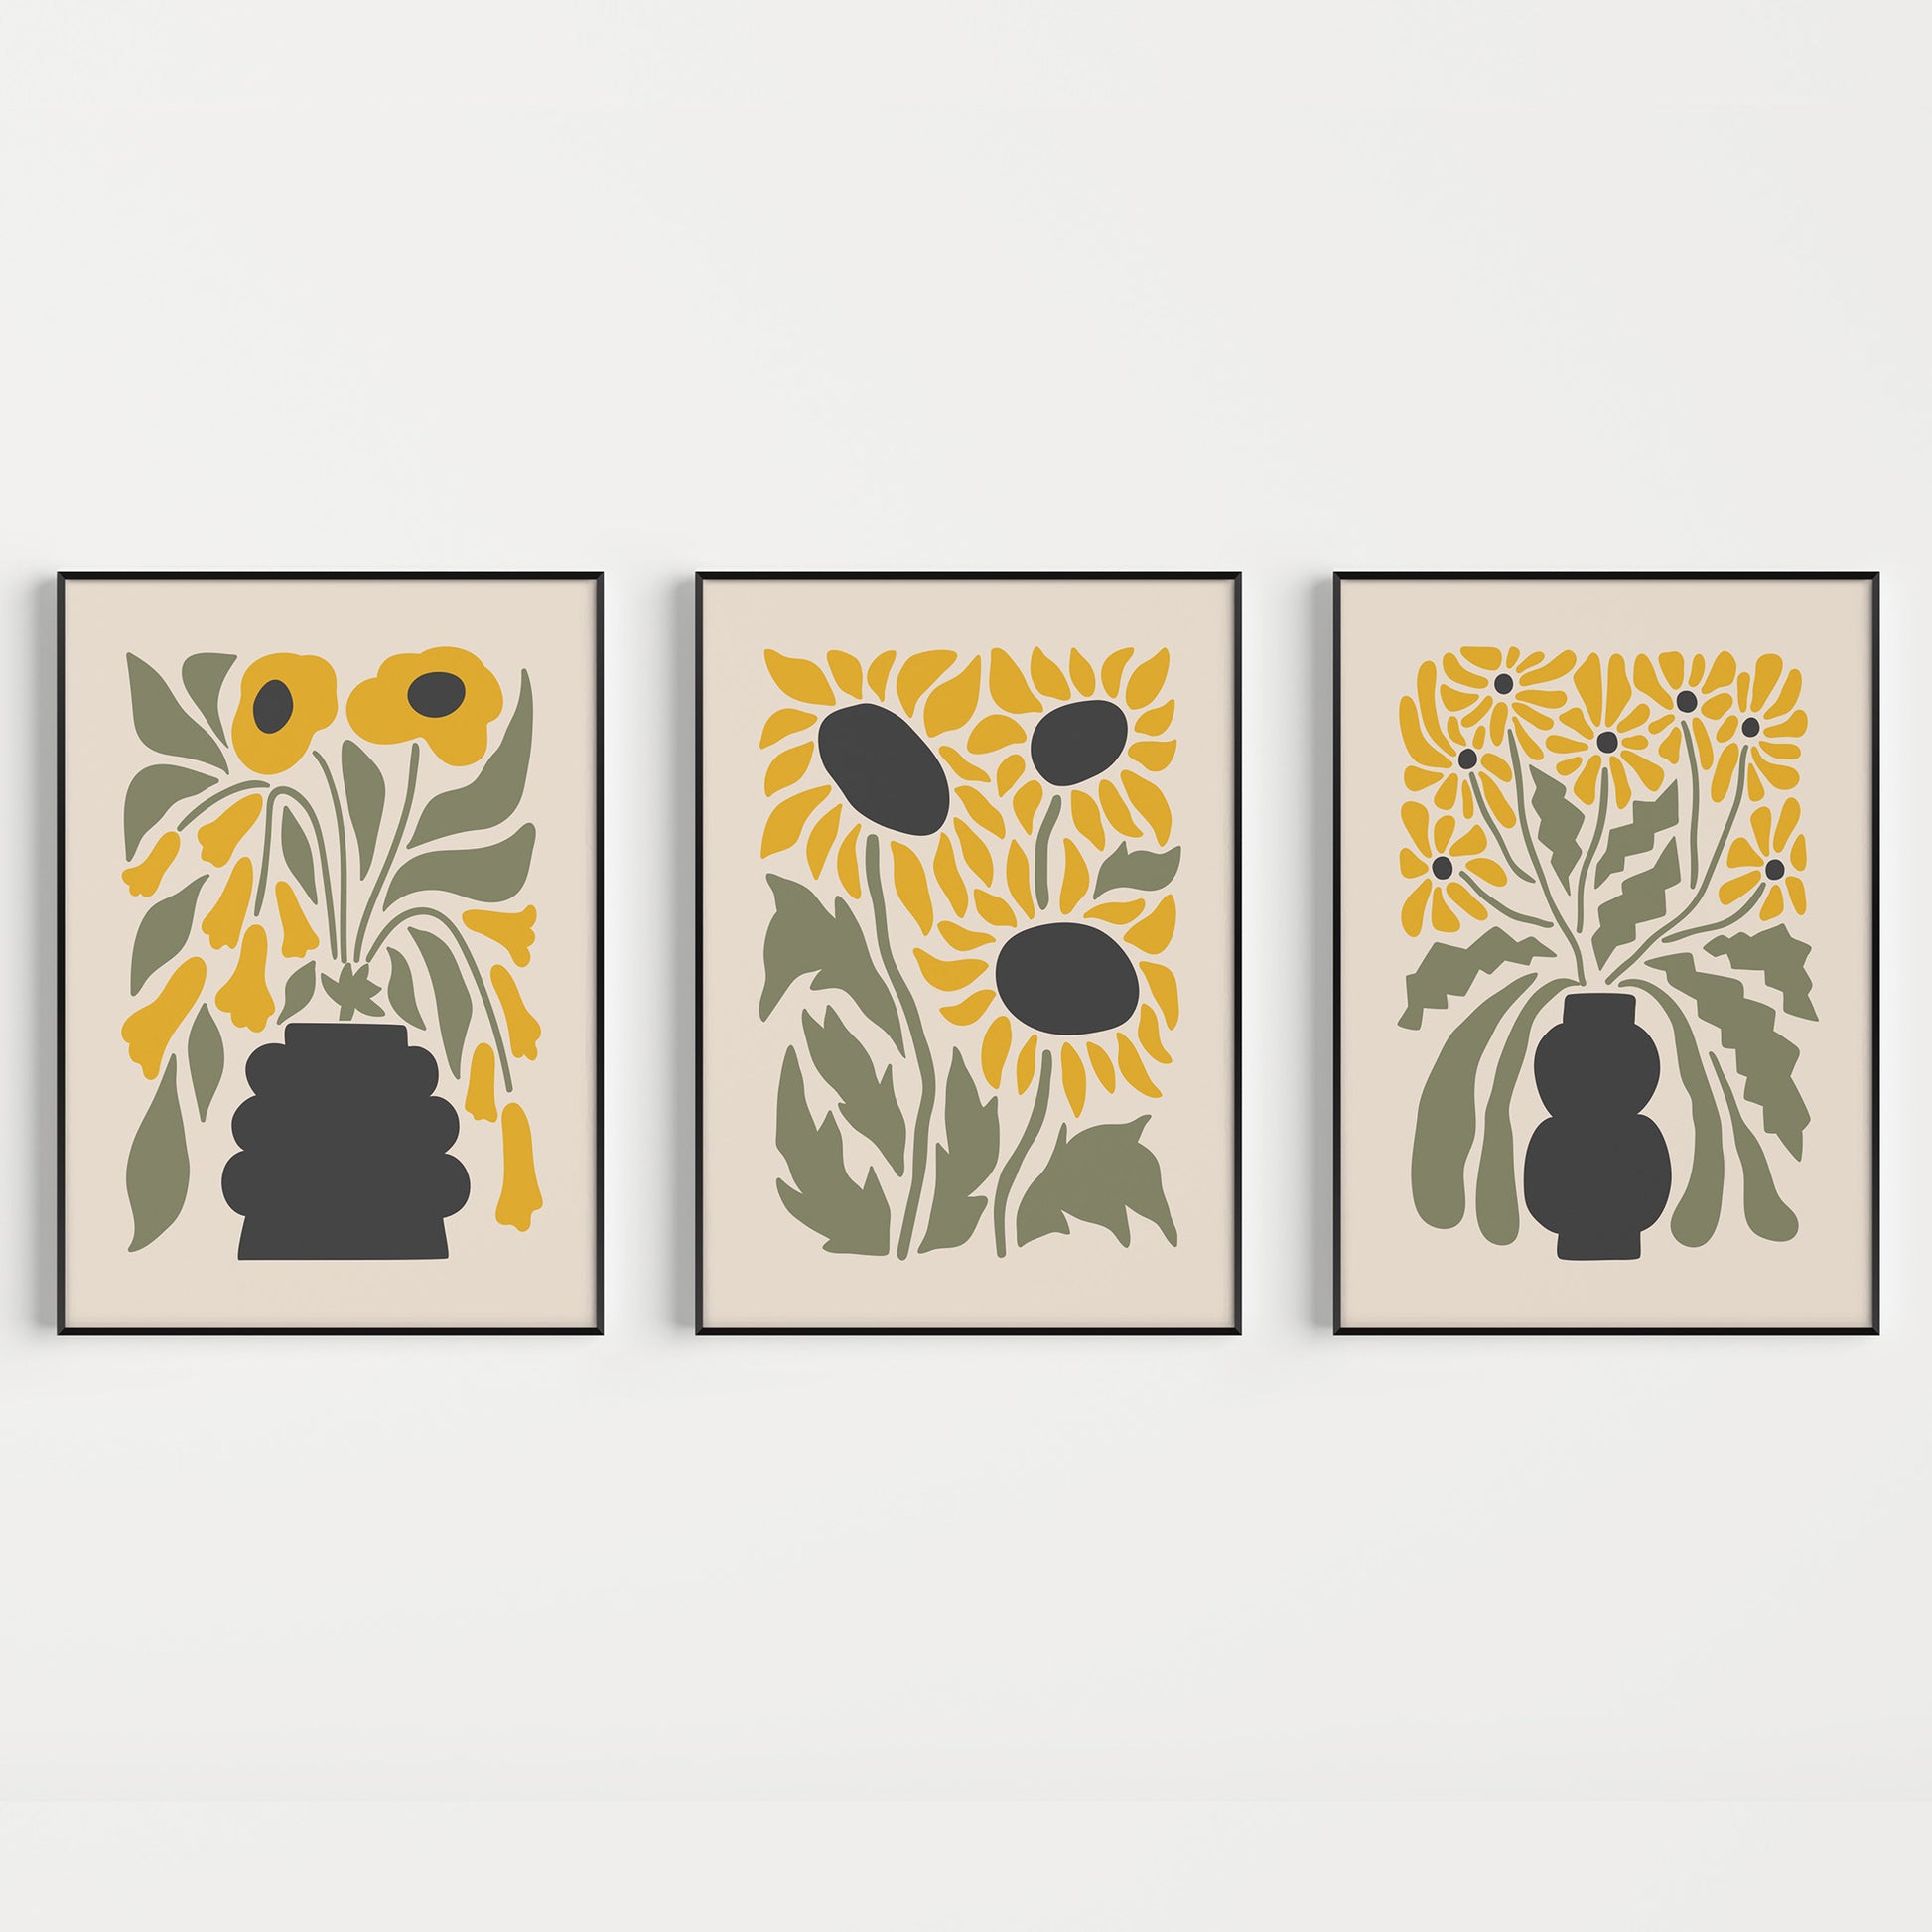 Green and yellow flower prints in a minimalist style, set of 3